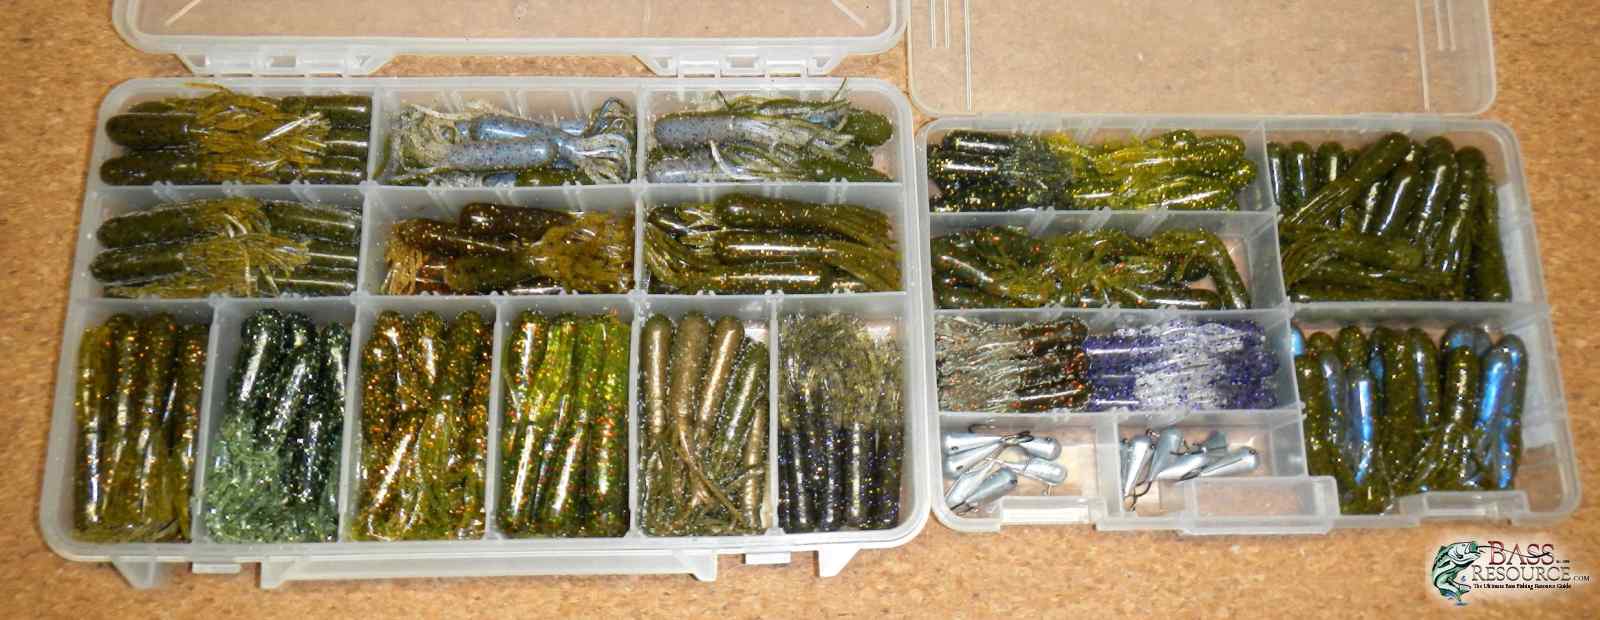 A Tube Bait Question - Fishing Tackle - Bass Fishing Forums